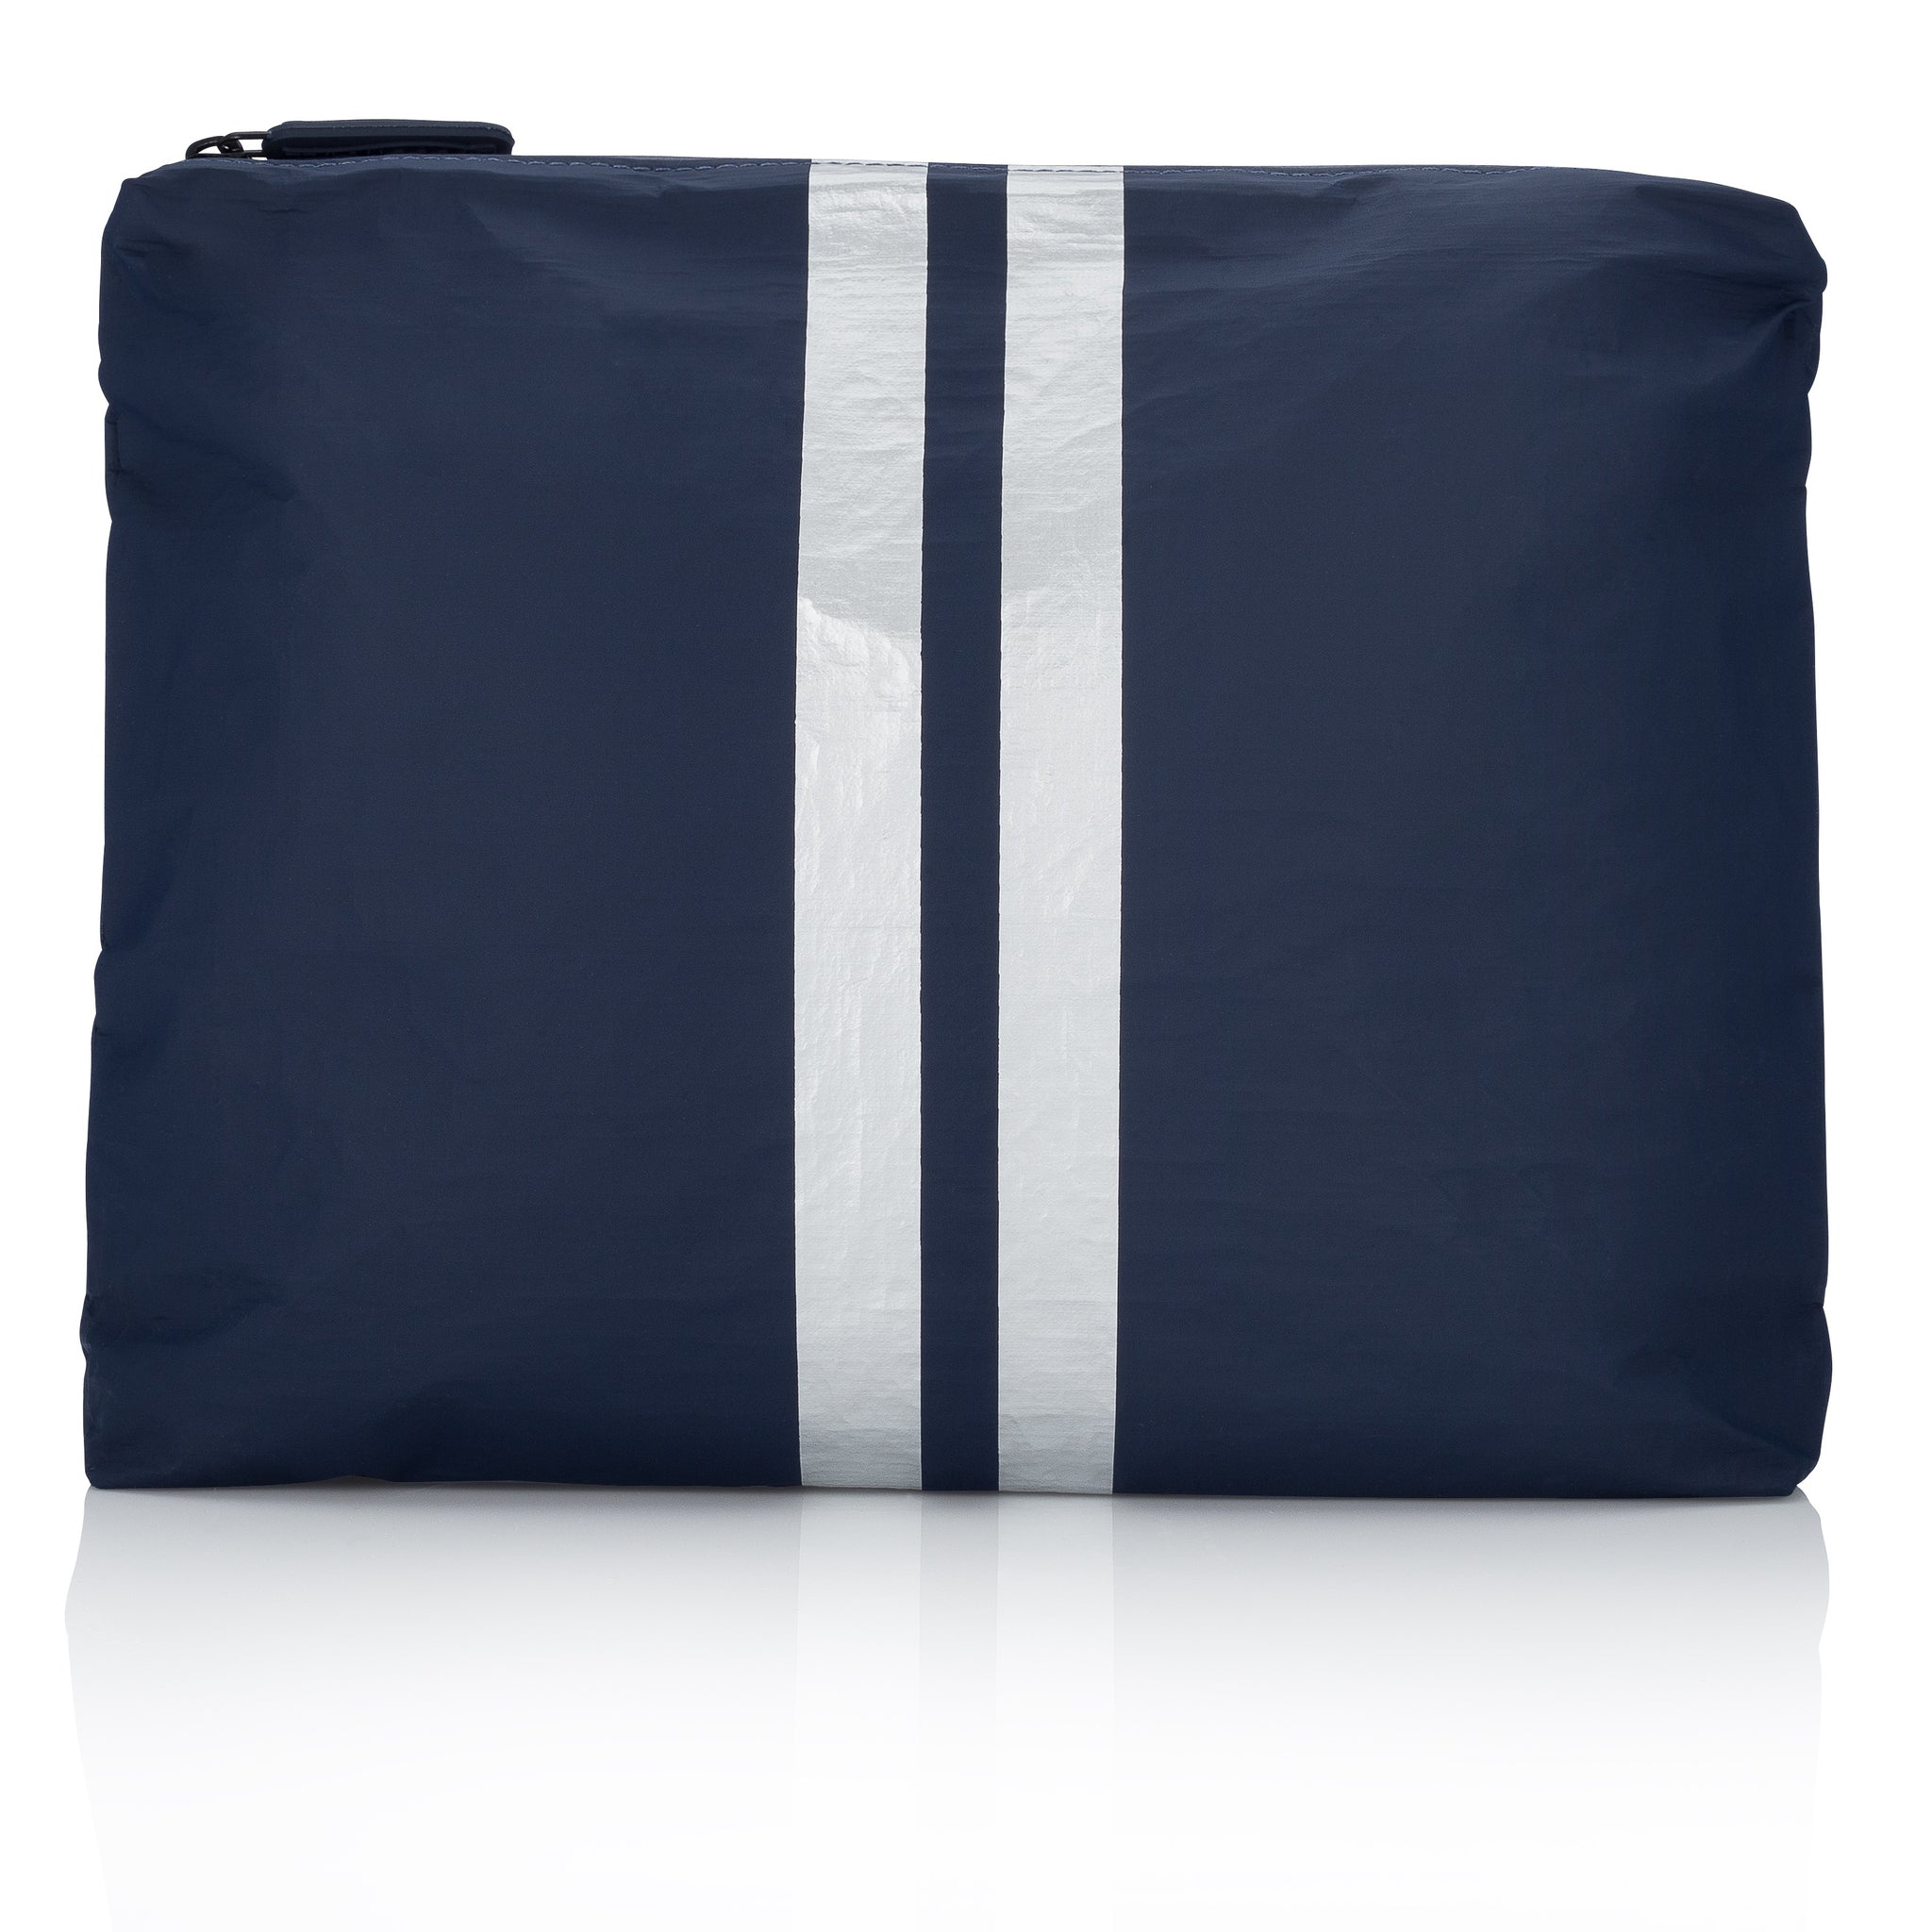 Travel Pack- Medium Pack - Navy HLT Collection with Metallic Silver Stripes